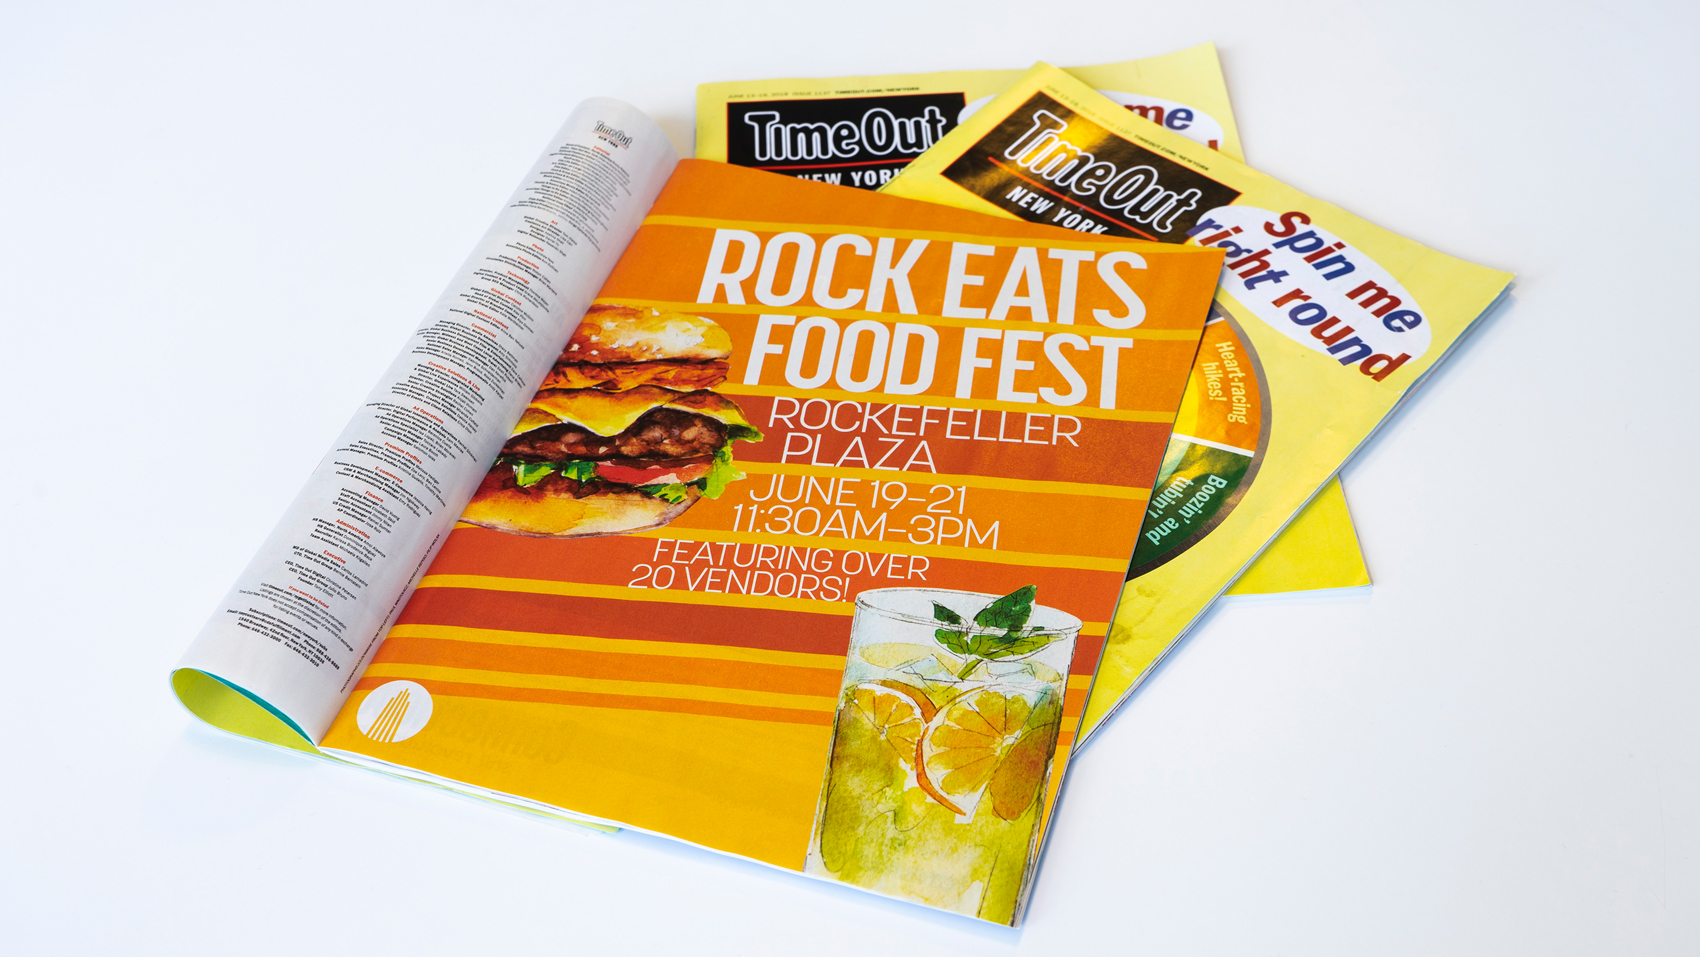 Print collateral for Fall Rock Eats Food Fest